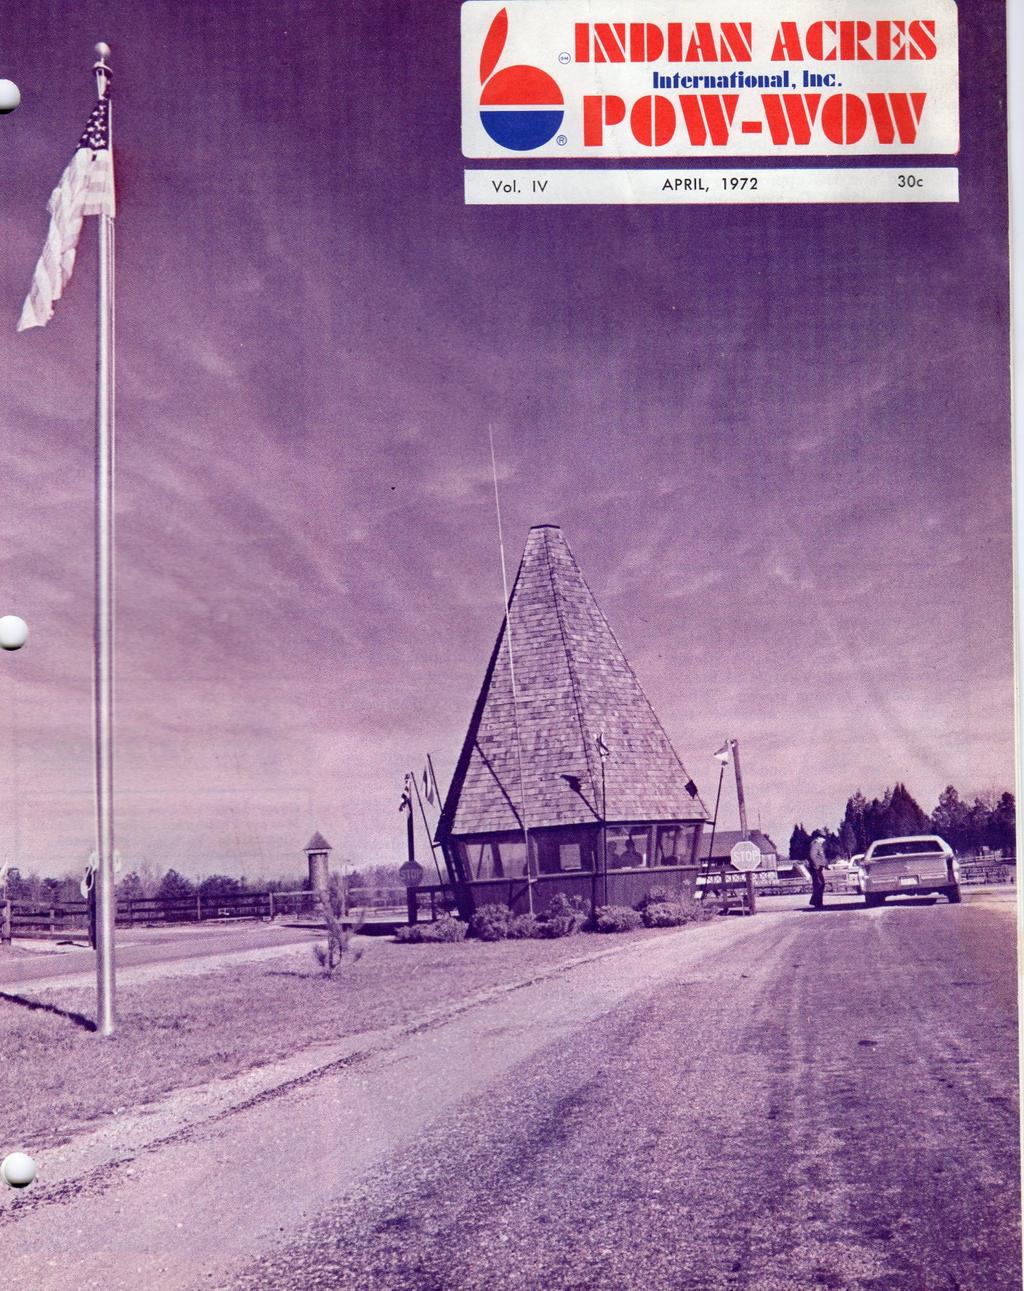 Pow Wow Flashback A bit of IACT history found on the cover of the April 1972 edition of Pow Wow. The IACT security entrance. Also note the tower in the background that is still here today.